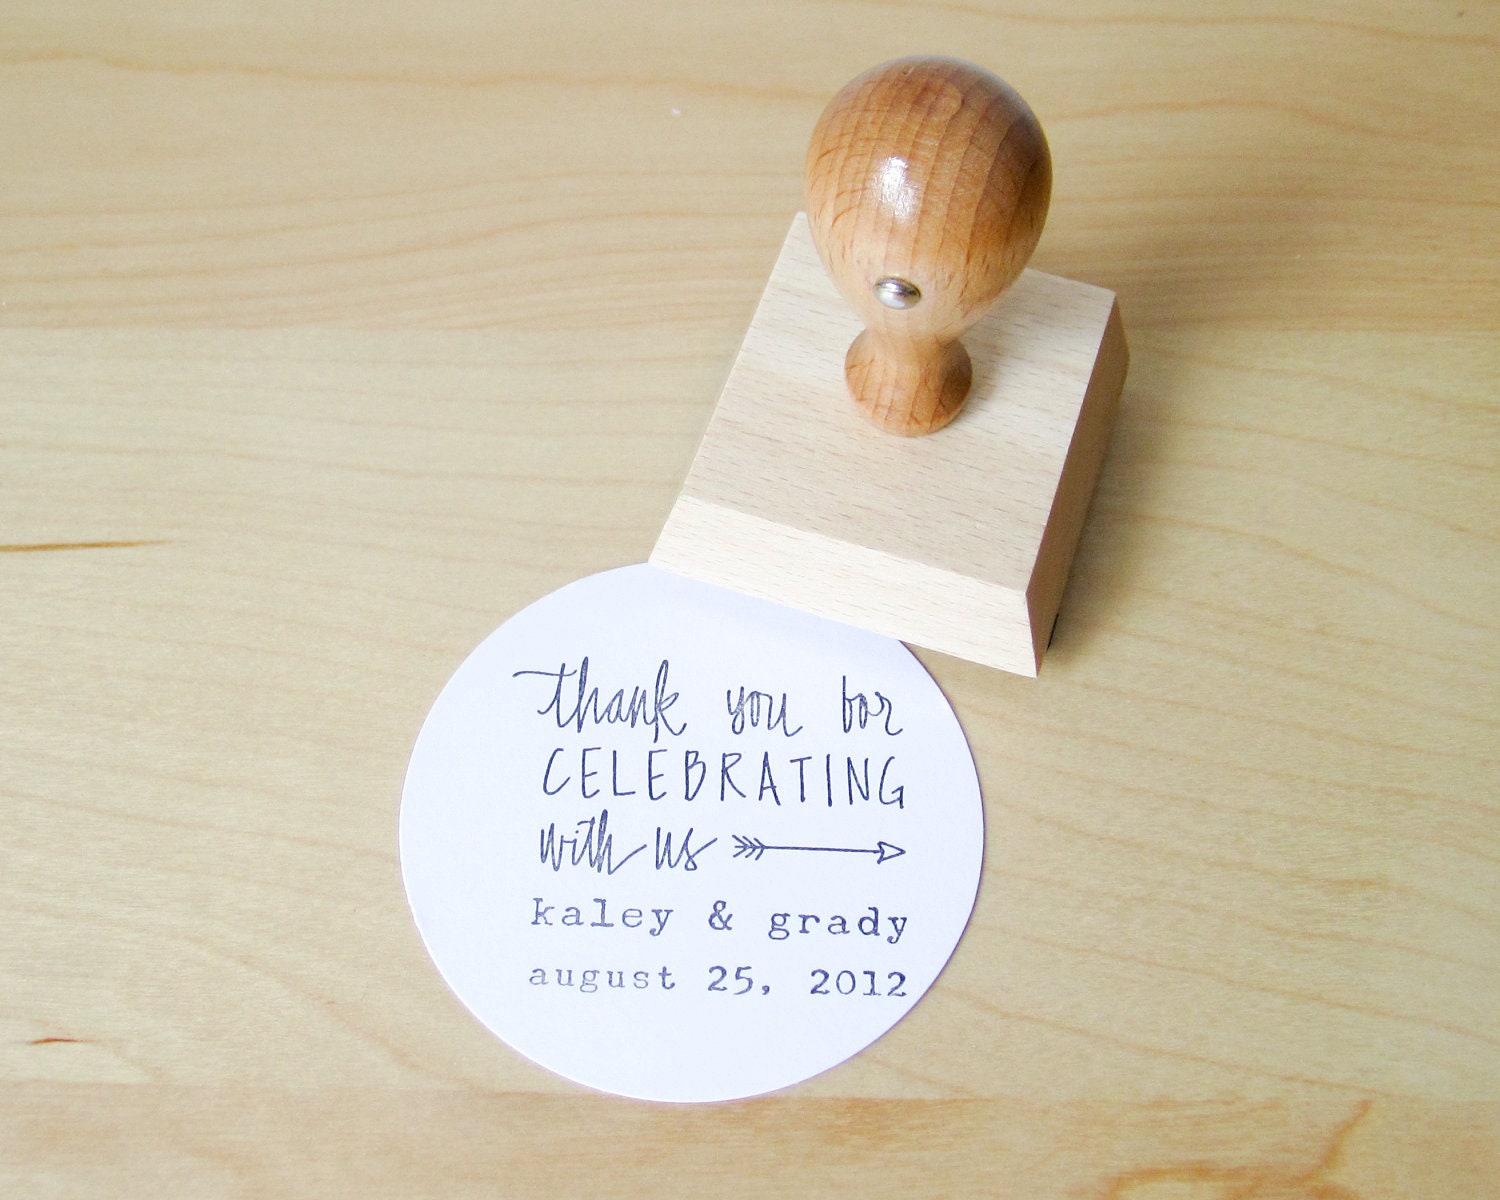 Custom Wedding Calligrapy Stamp - 2 inch Thank You For Celebrating With Us personalized rubber stamp for DIY wedding favors